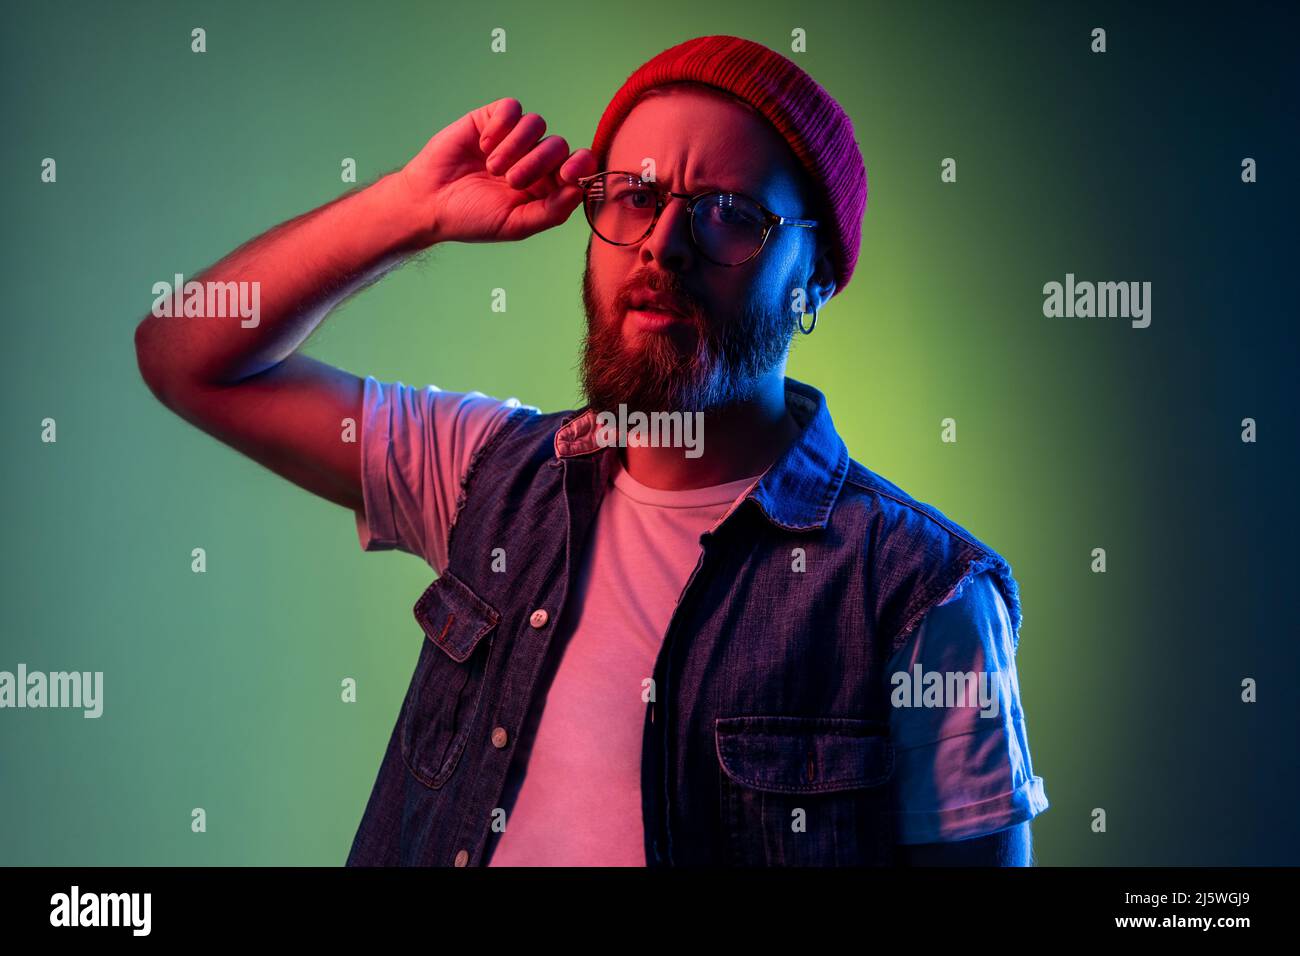 Serious hipster man looking at camera with attentive look, keeping his arms on frame of glasses, wearing beanie hat and denim vest. Indoor studio shot isolated on colorful neon light background. Stock Photo